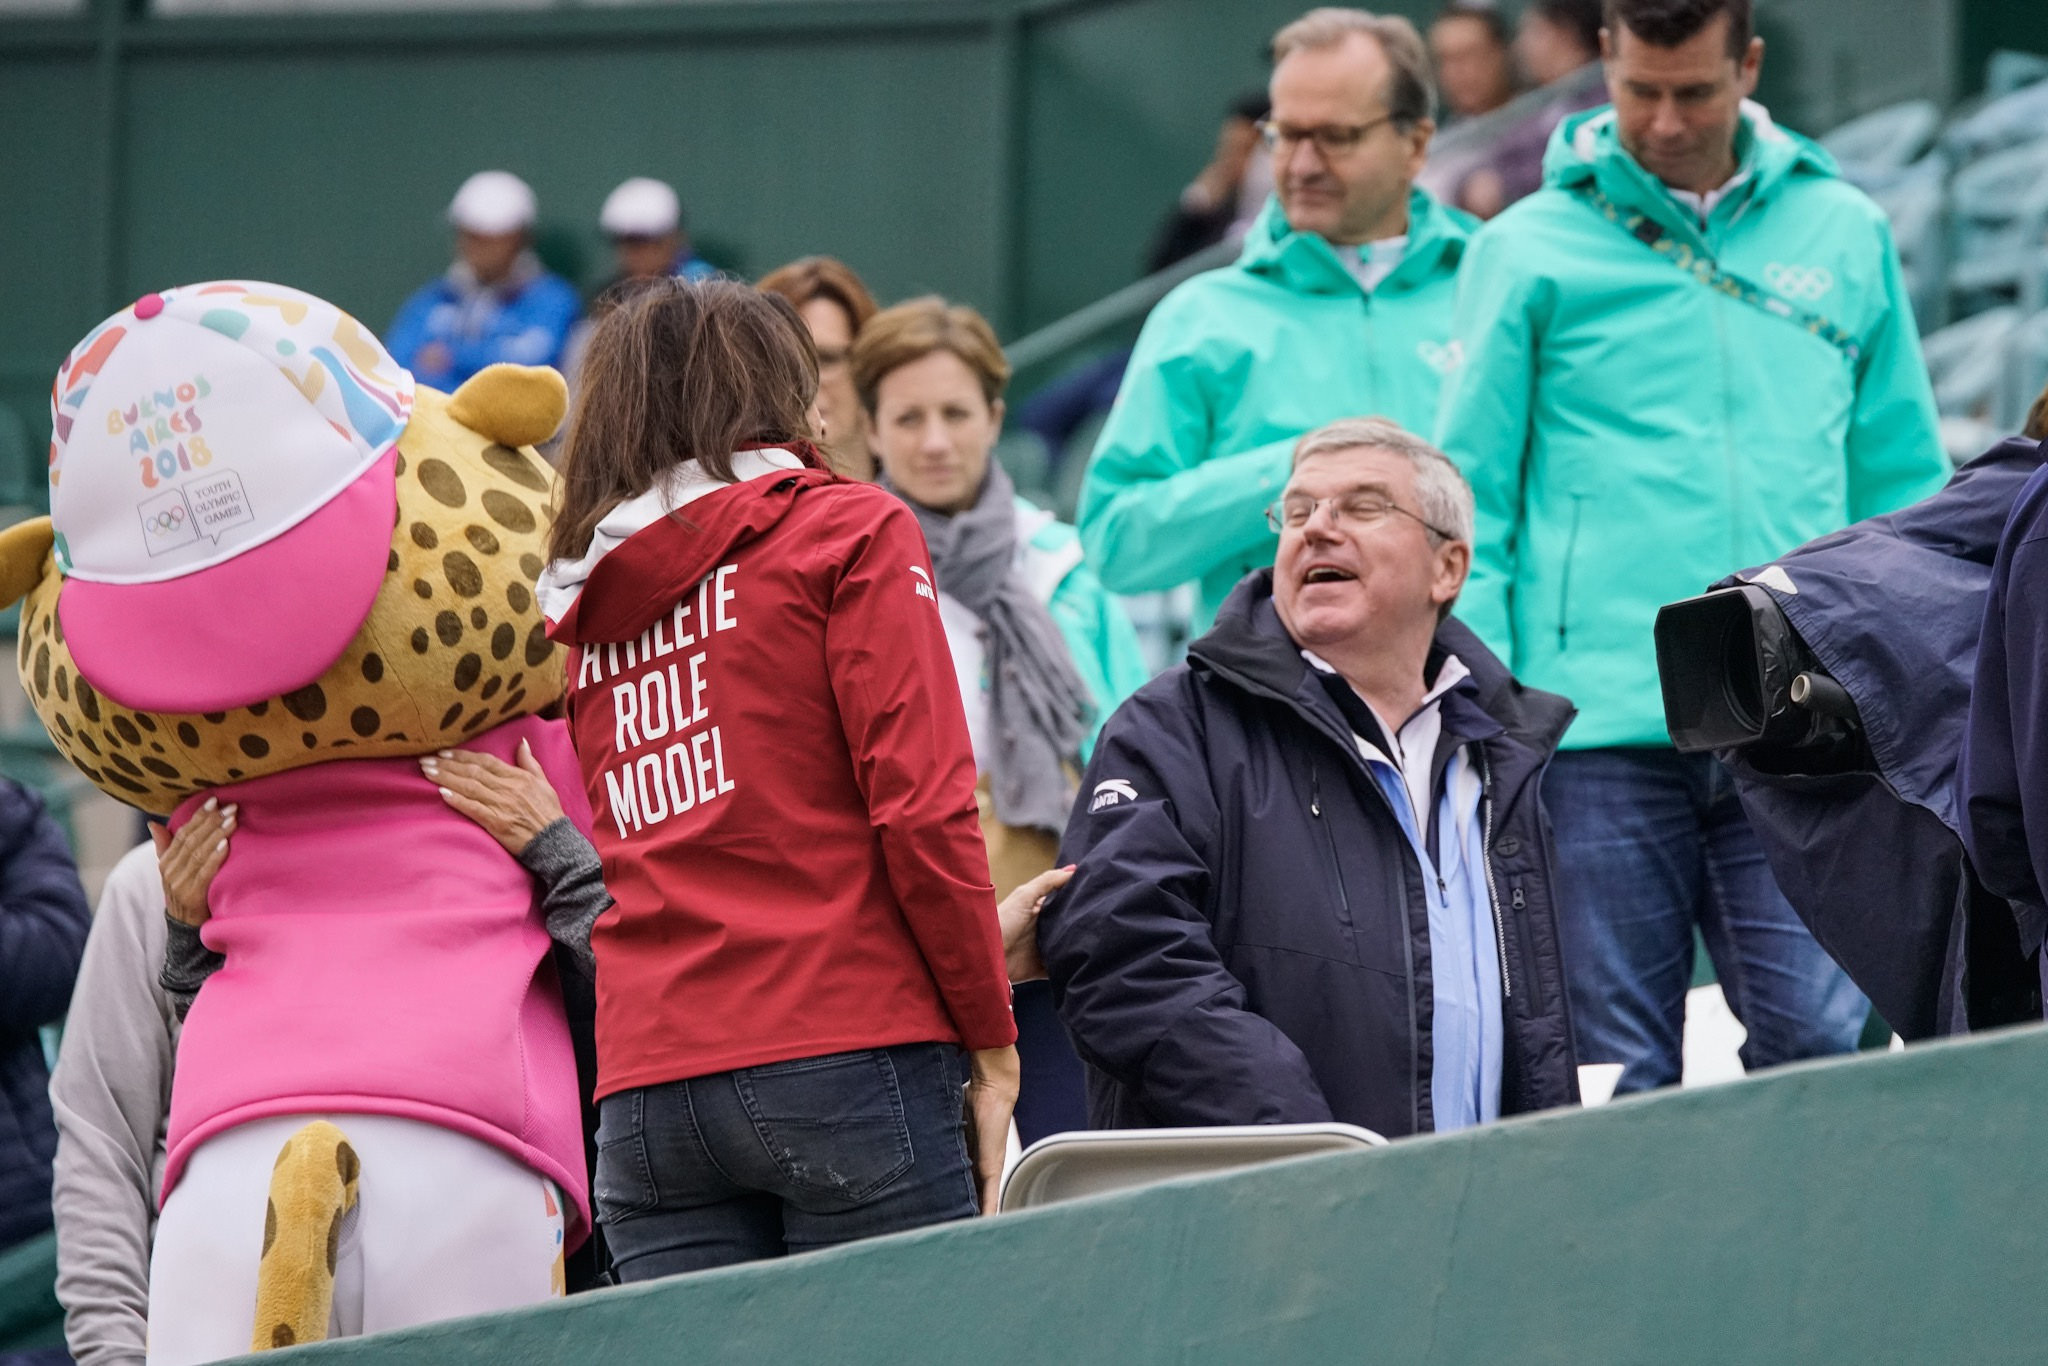 IOC President Thomas Bach was among the attendees at the tennis event today ©Buenos Aires 2018